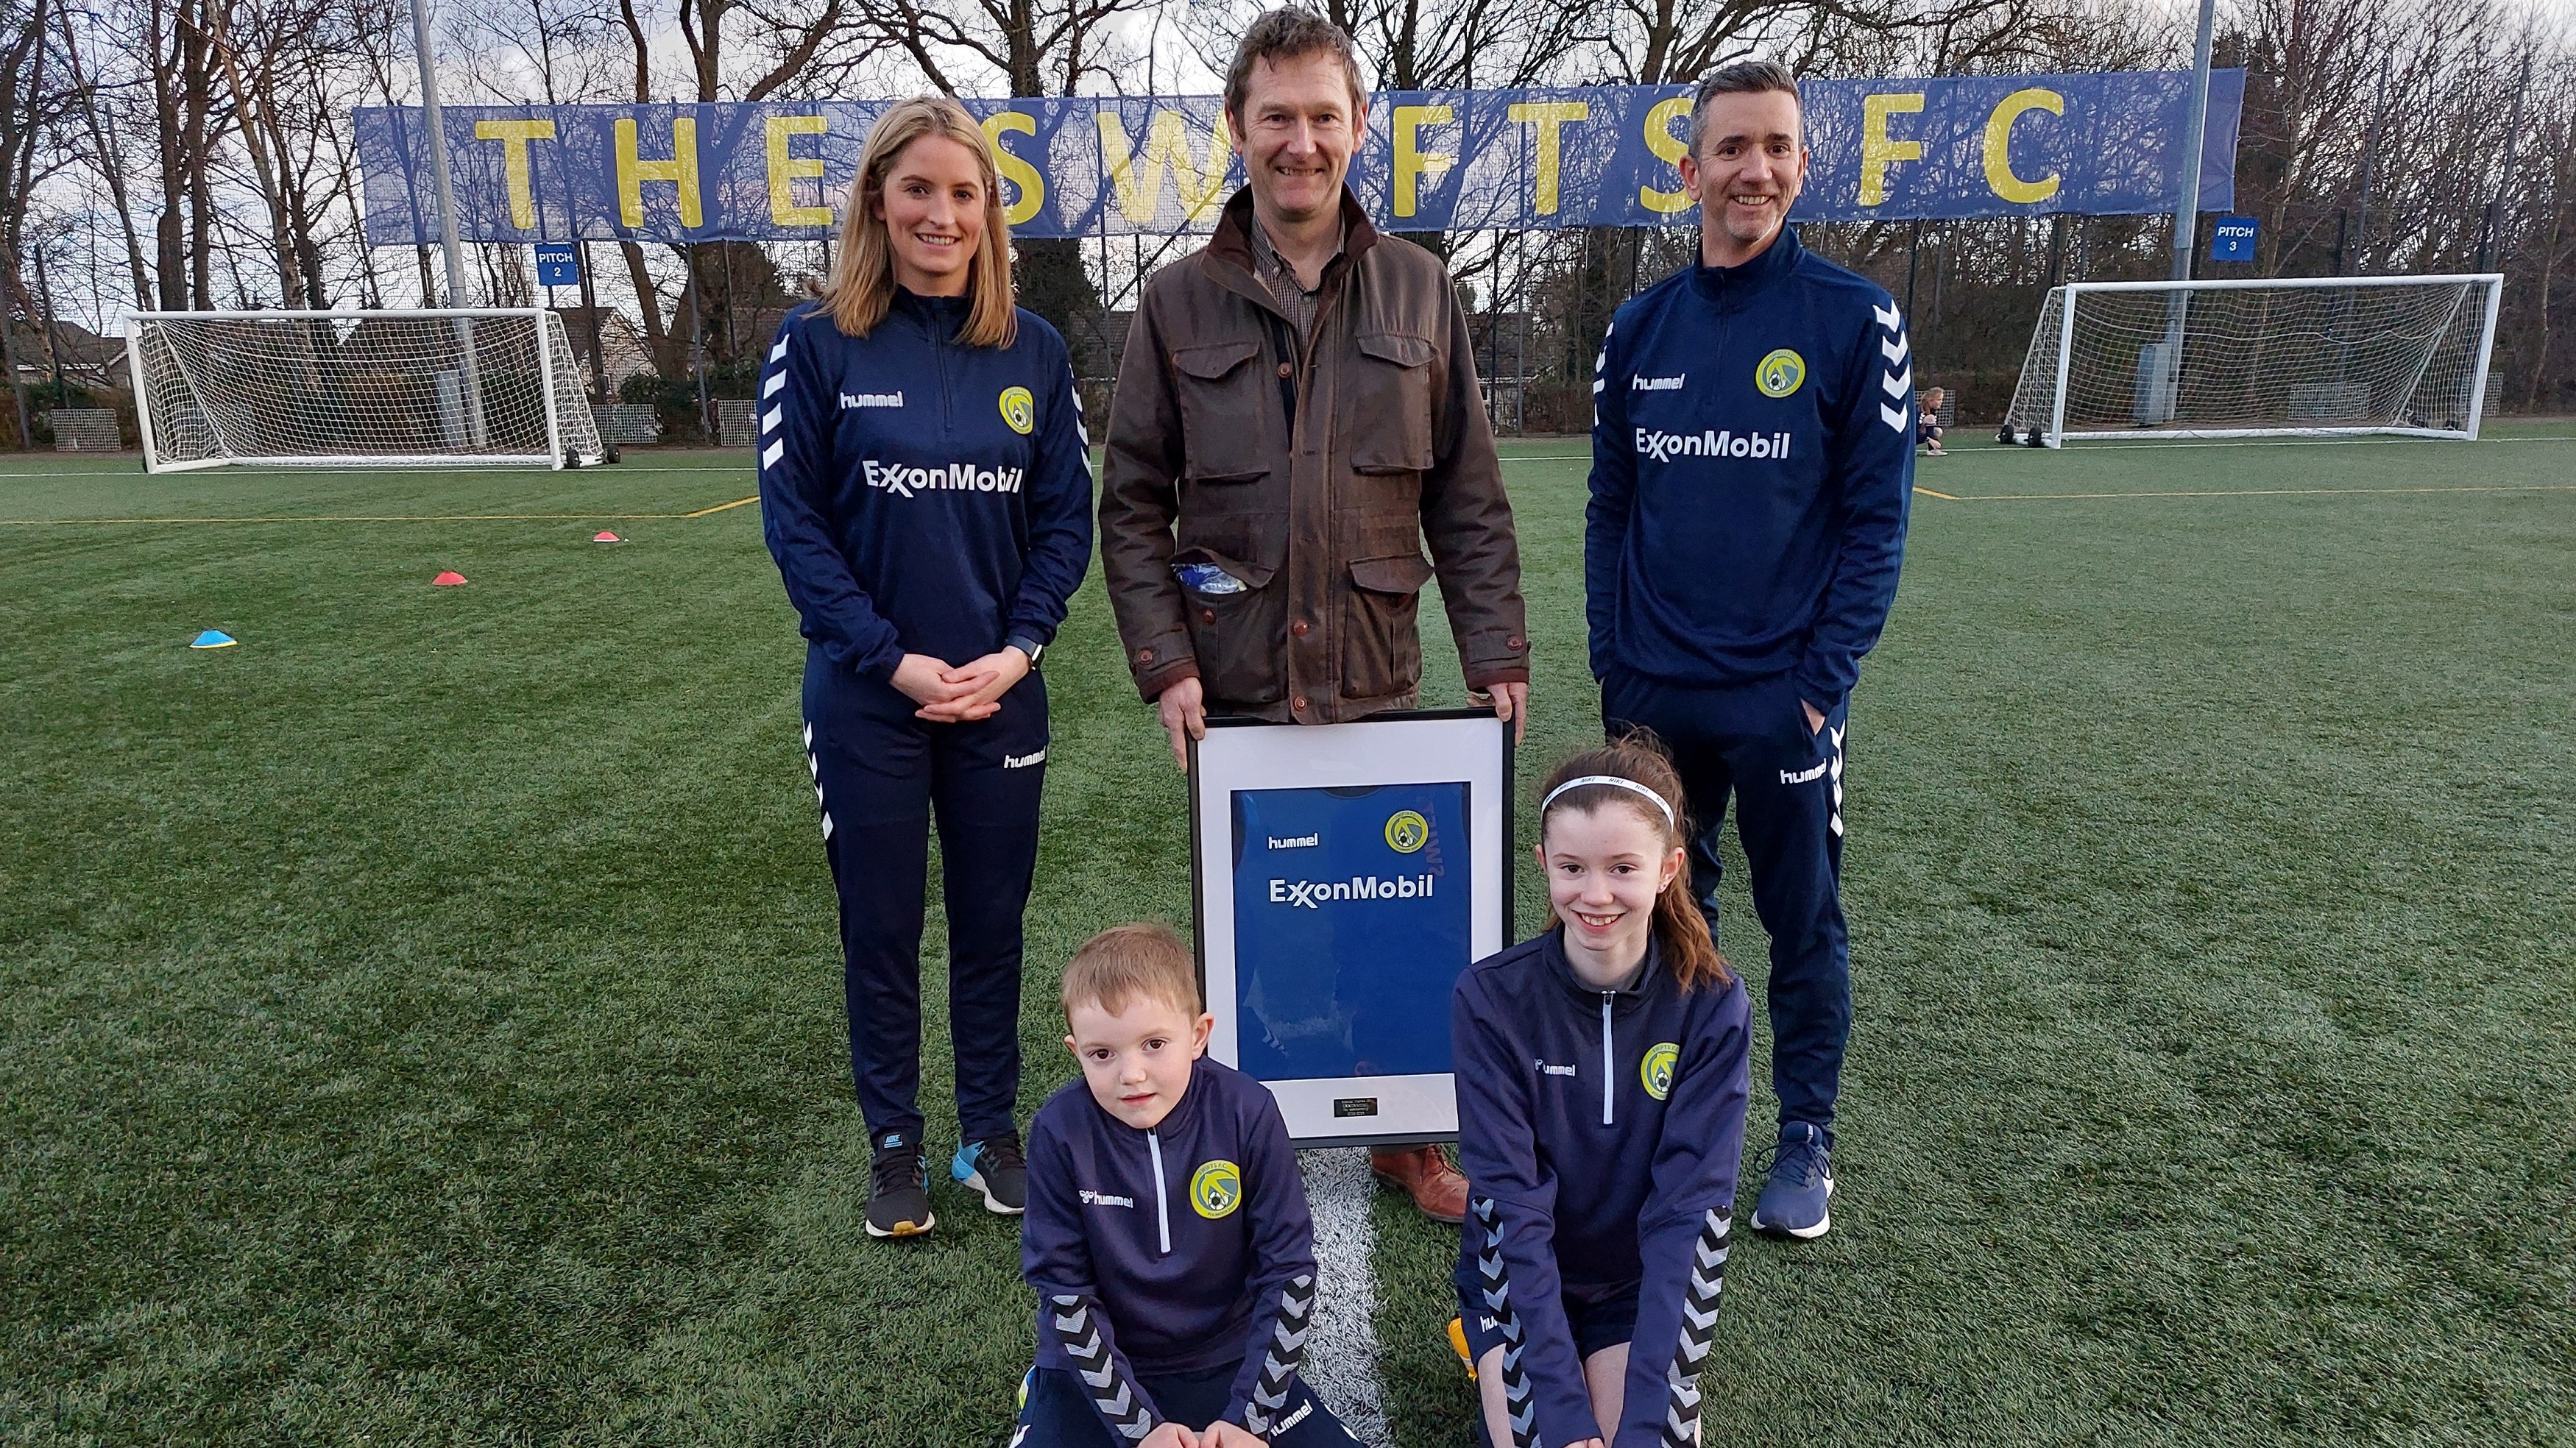 Image The coaches at Swifts FC have smart new branded tracksuits and T-shirts thanks to a donation from our Fife Ethylene Plant